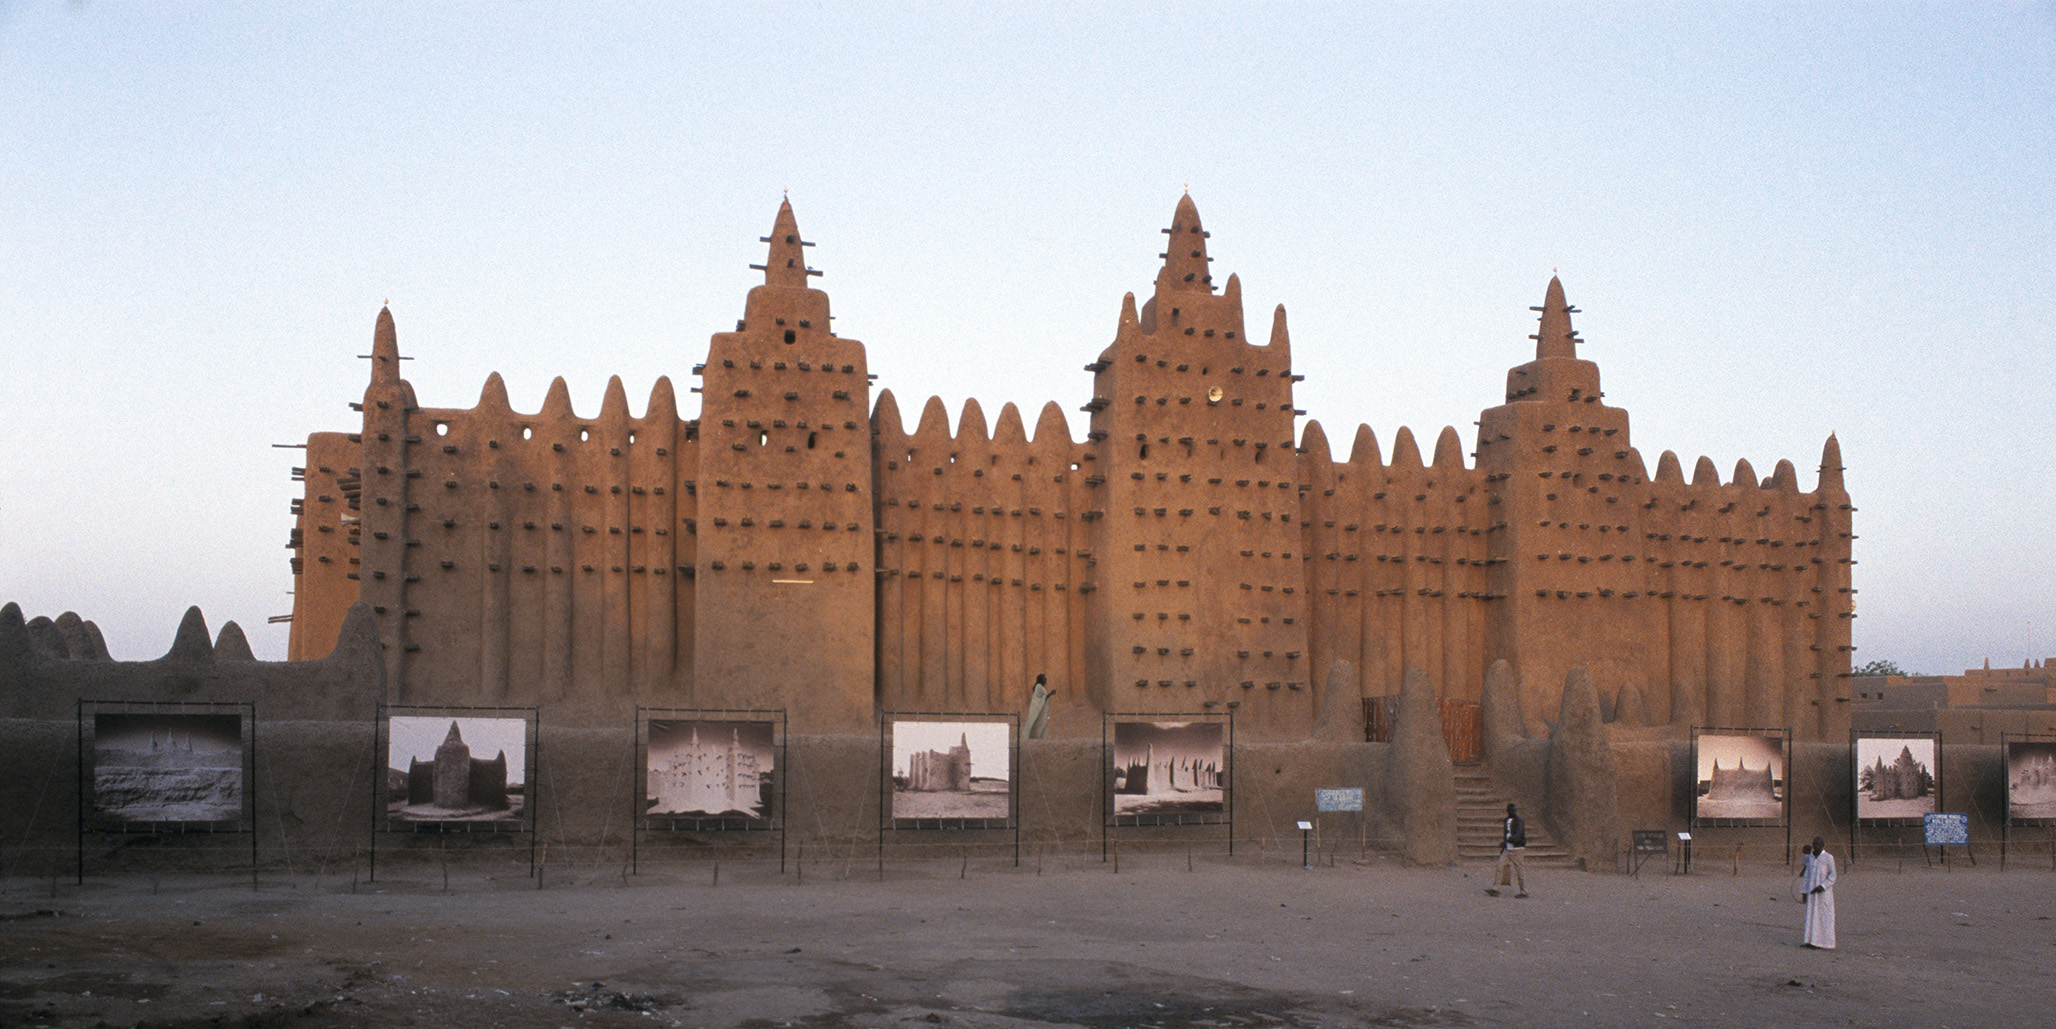 Adobe mosques in Mali open air exhibition at the Great Mosque of Djenné